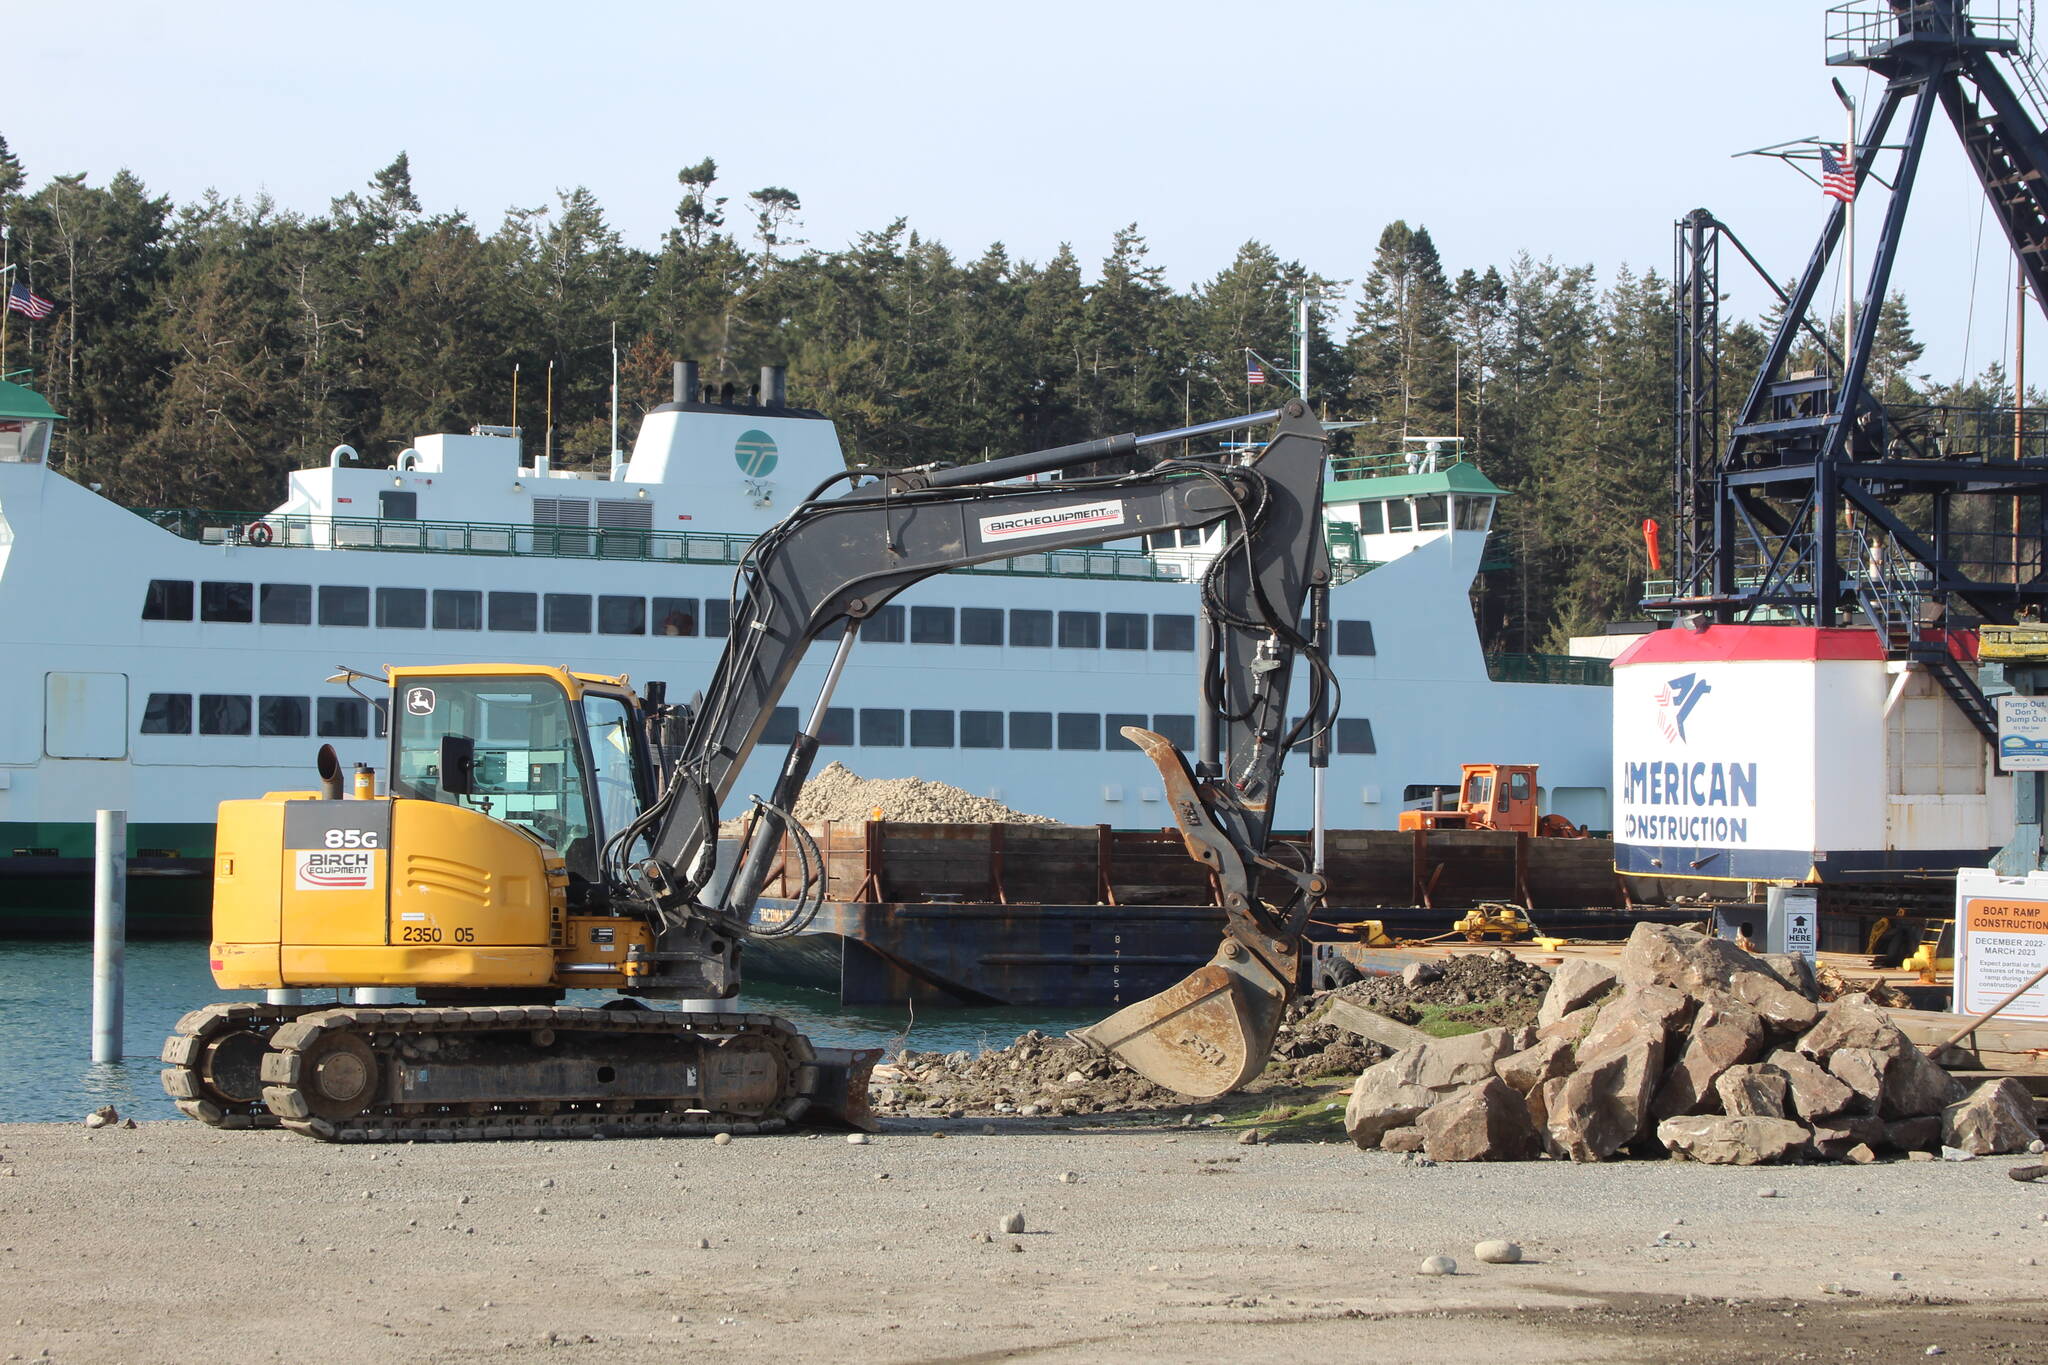 Photo by Karina Andrew/Whidbey News-Times
Construction is in full swing at the Keystone Boat Launch near the Coupeville ferry terminal.